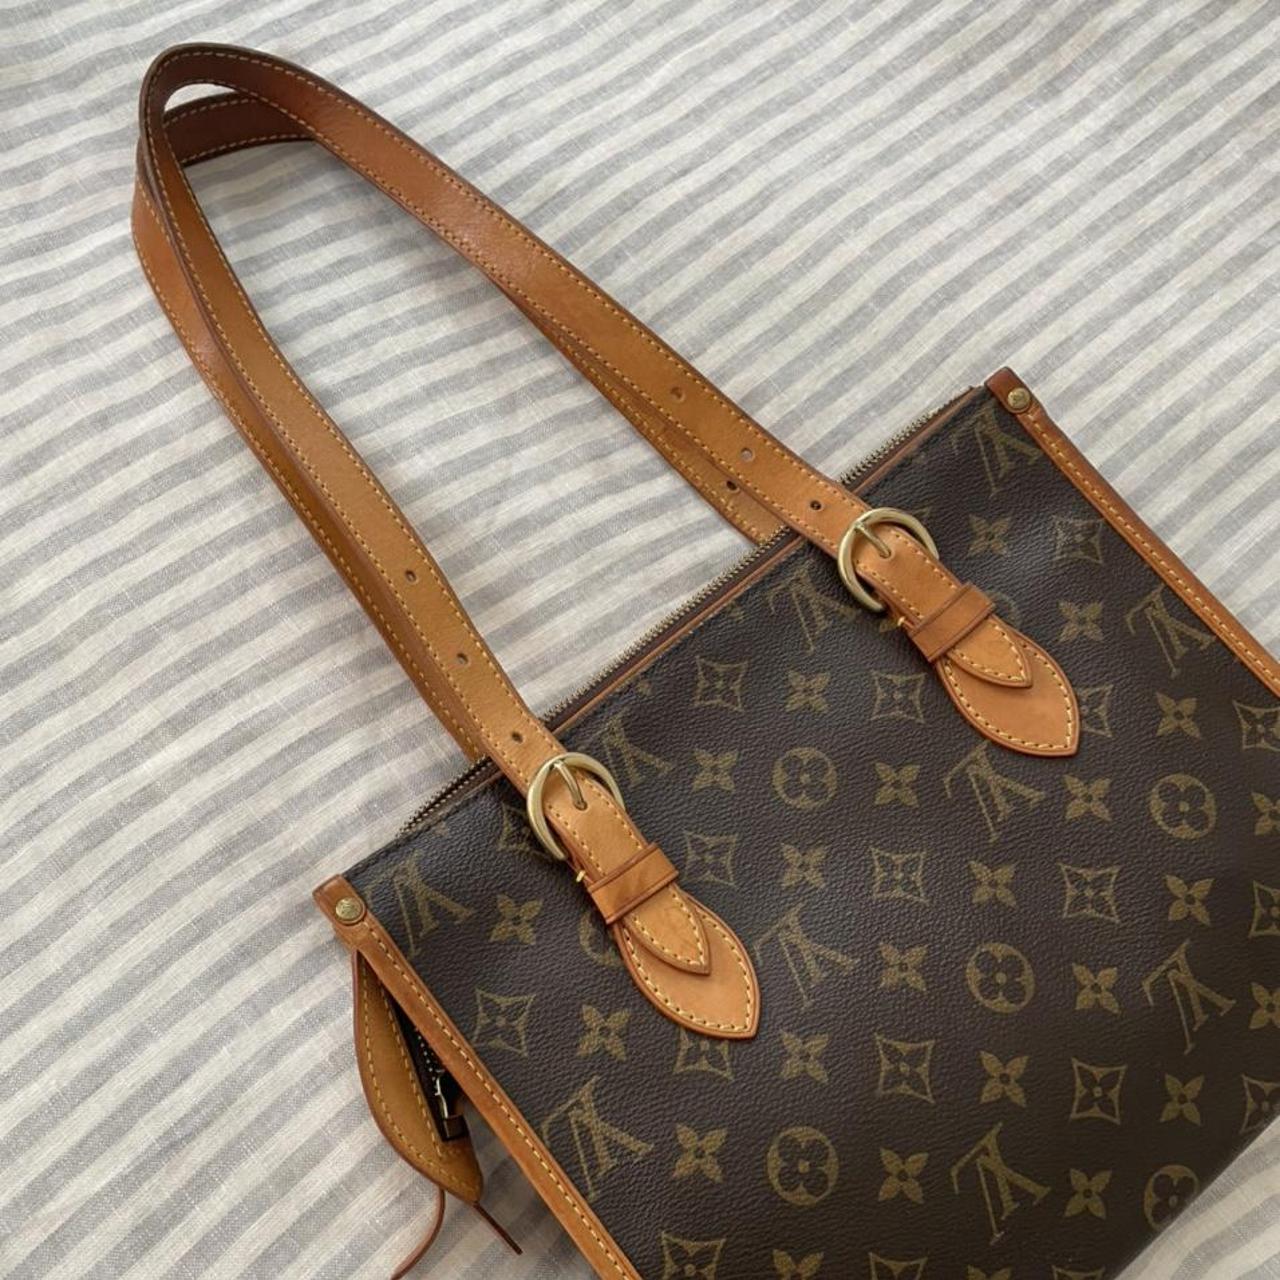 Limited Edition Louis Vuitton Monogram Perforated - Depop